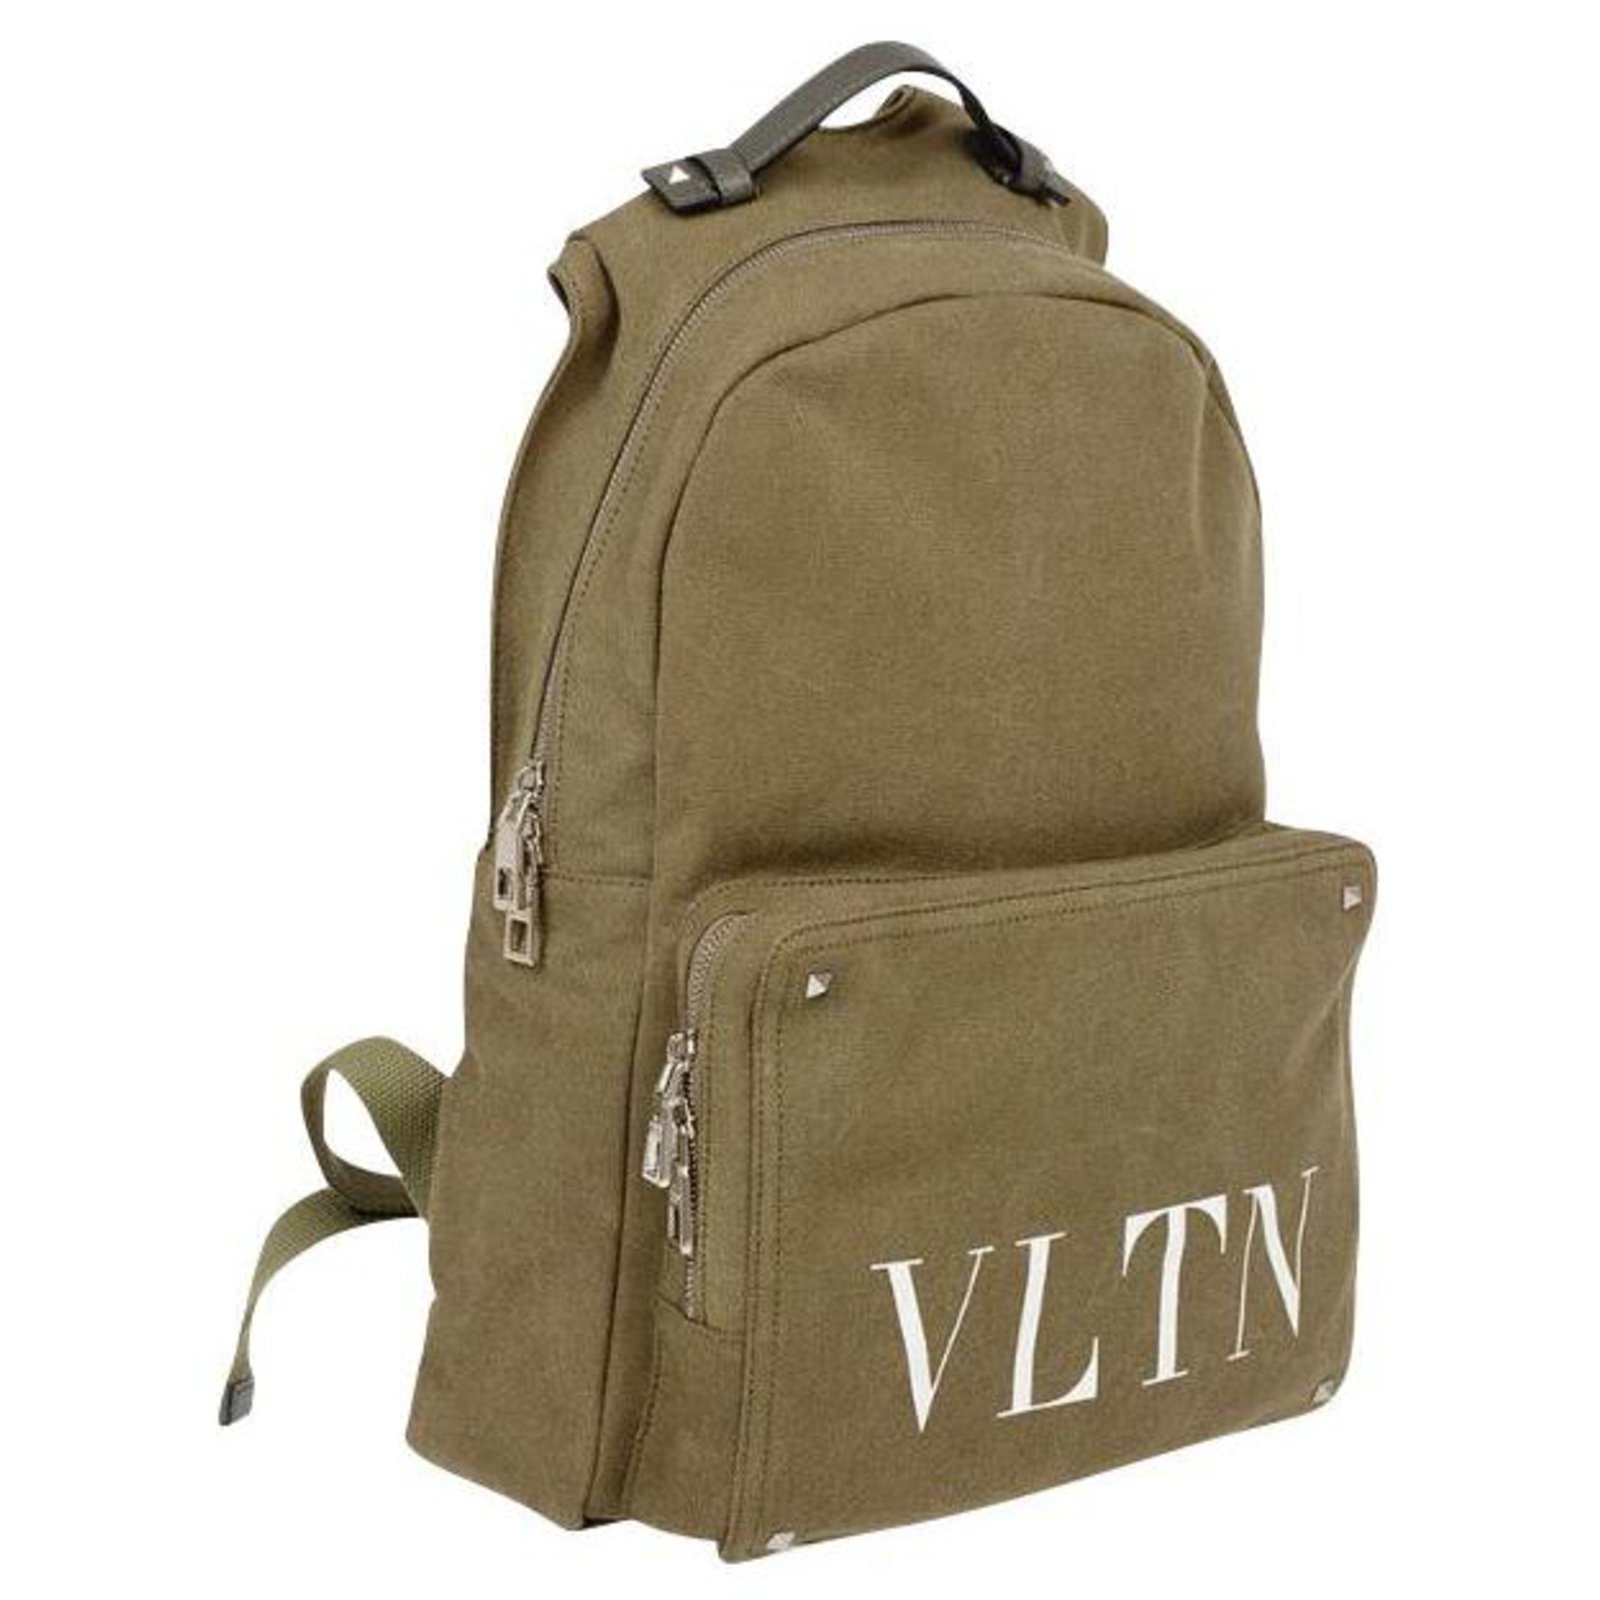 valentino backpack brown